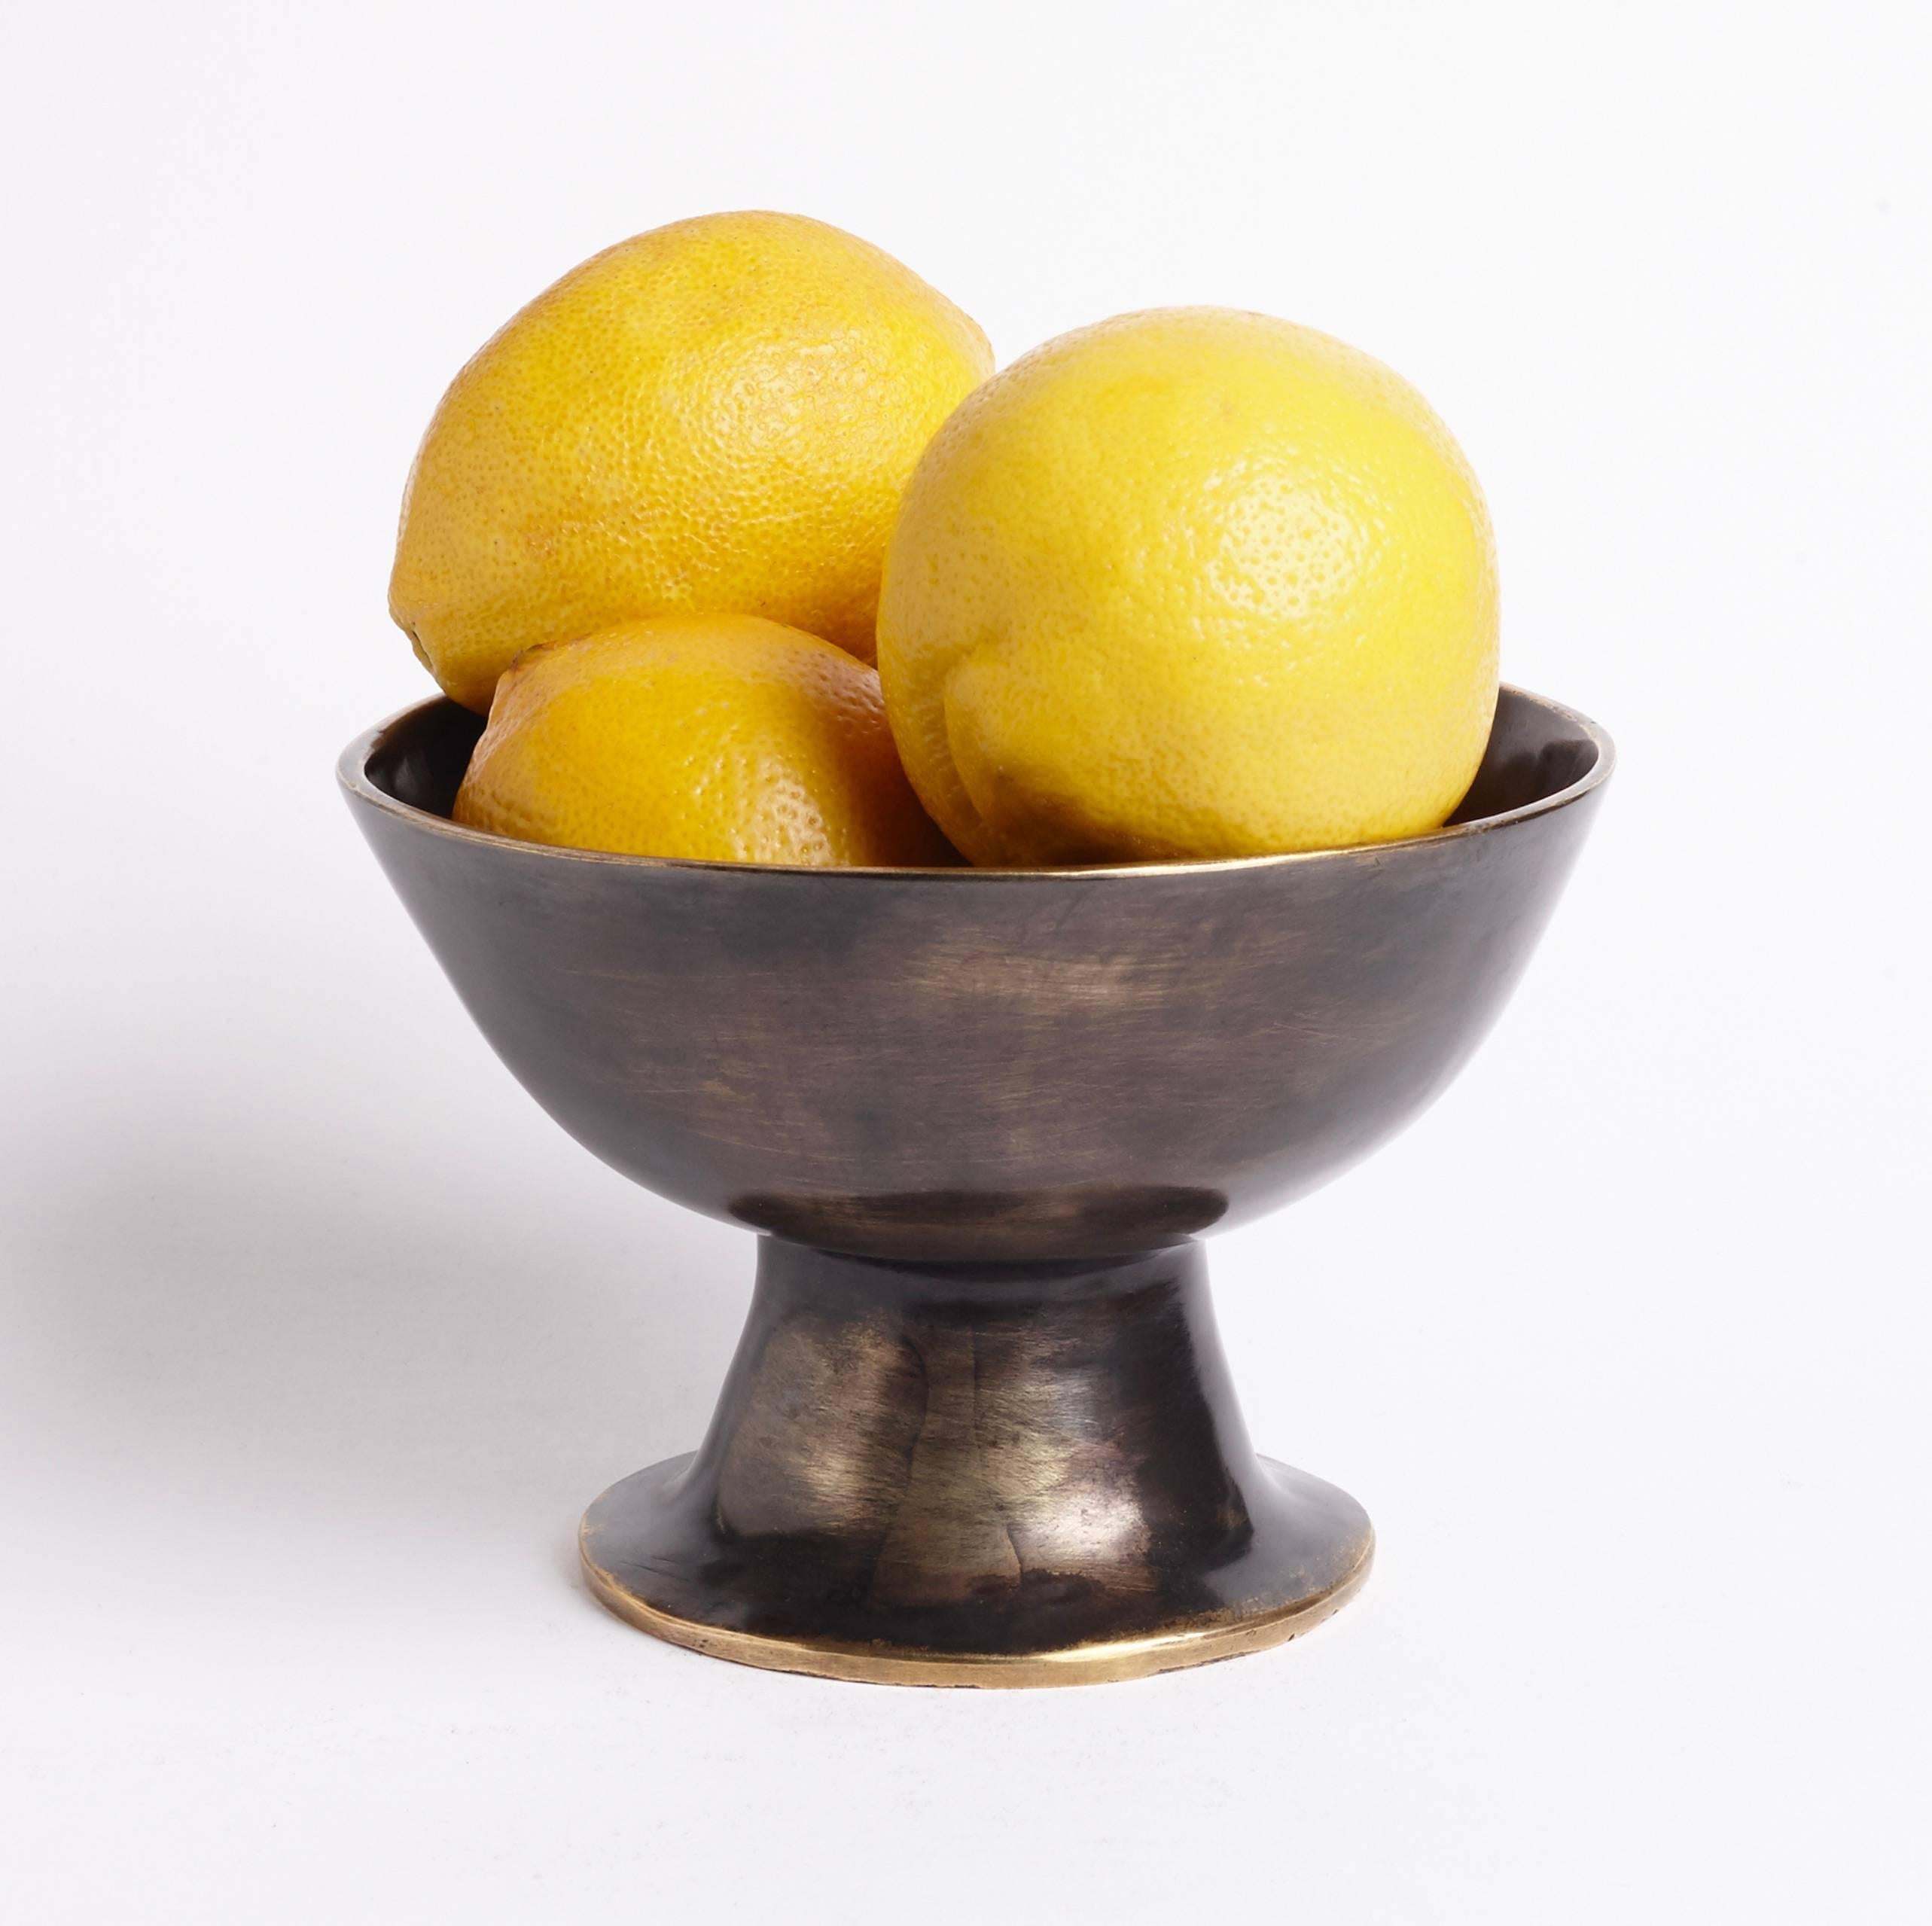 Recalling polychrome Pre-Columbian clay vessels, the elegant shape of this hand-forged cast-brass footed bowl has a sculptural quality that makes it ideal for display on a nightstand, vanity, desk, or entry table.